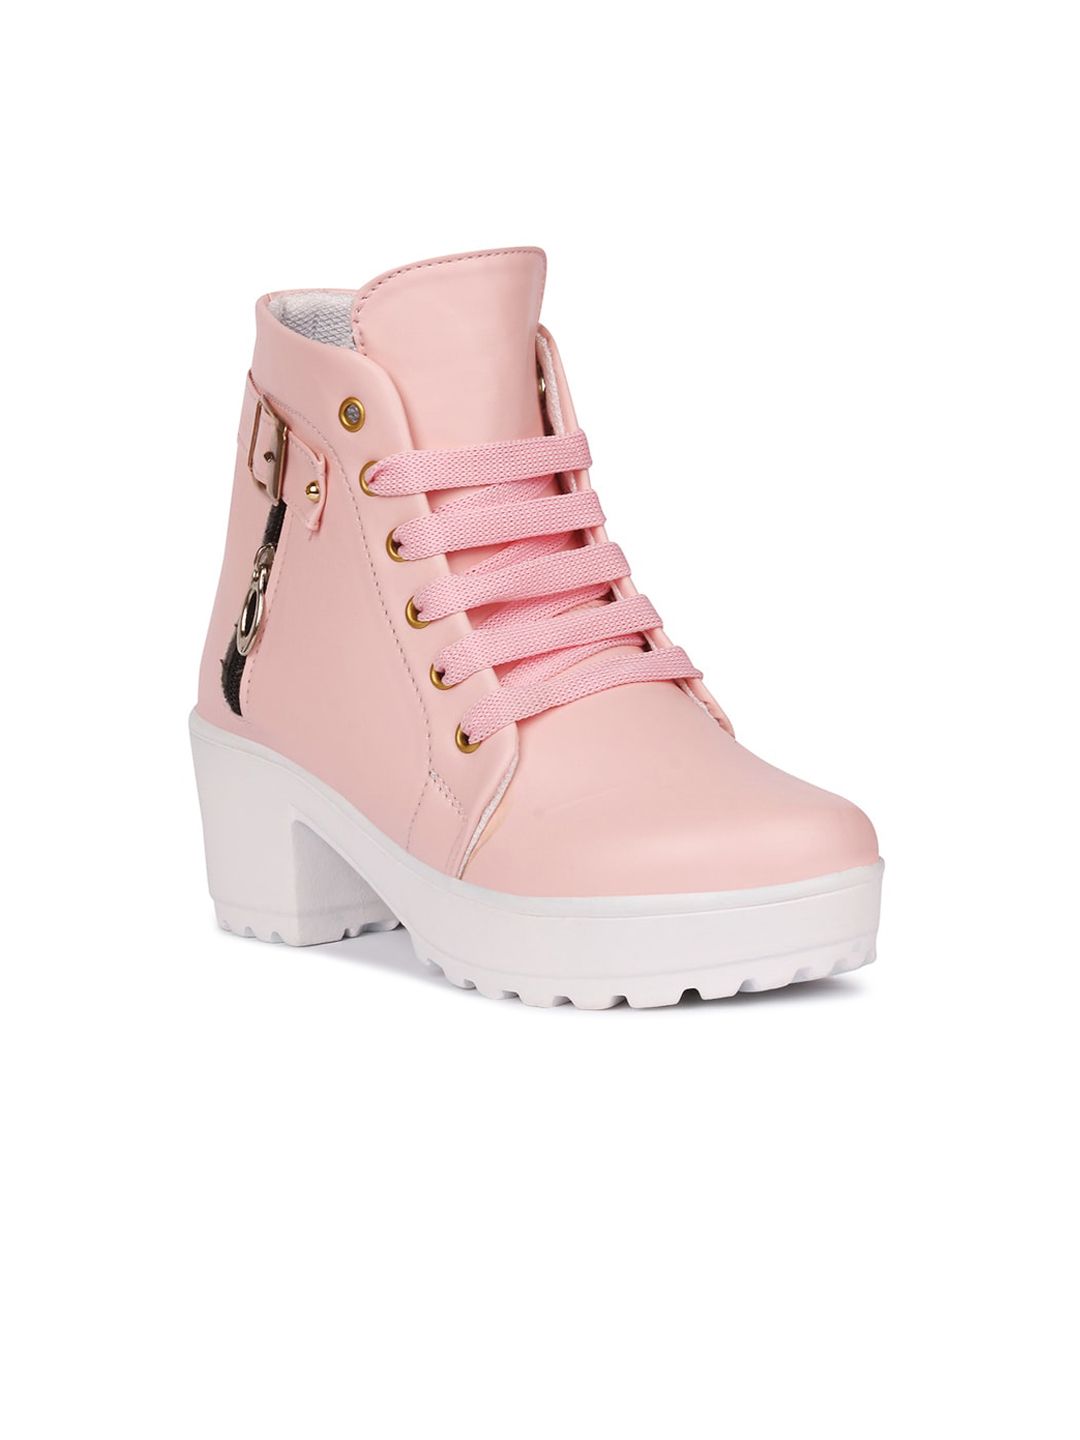 Longwalk Women Pink Solid PU Platform Heeled Boots With Buckles Price in India